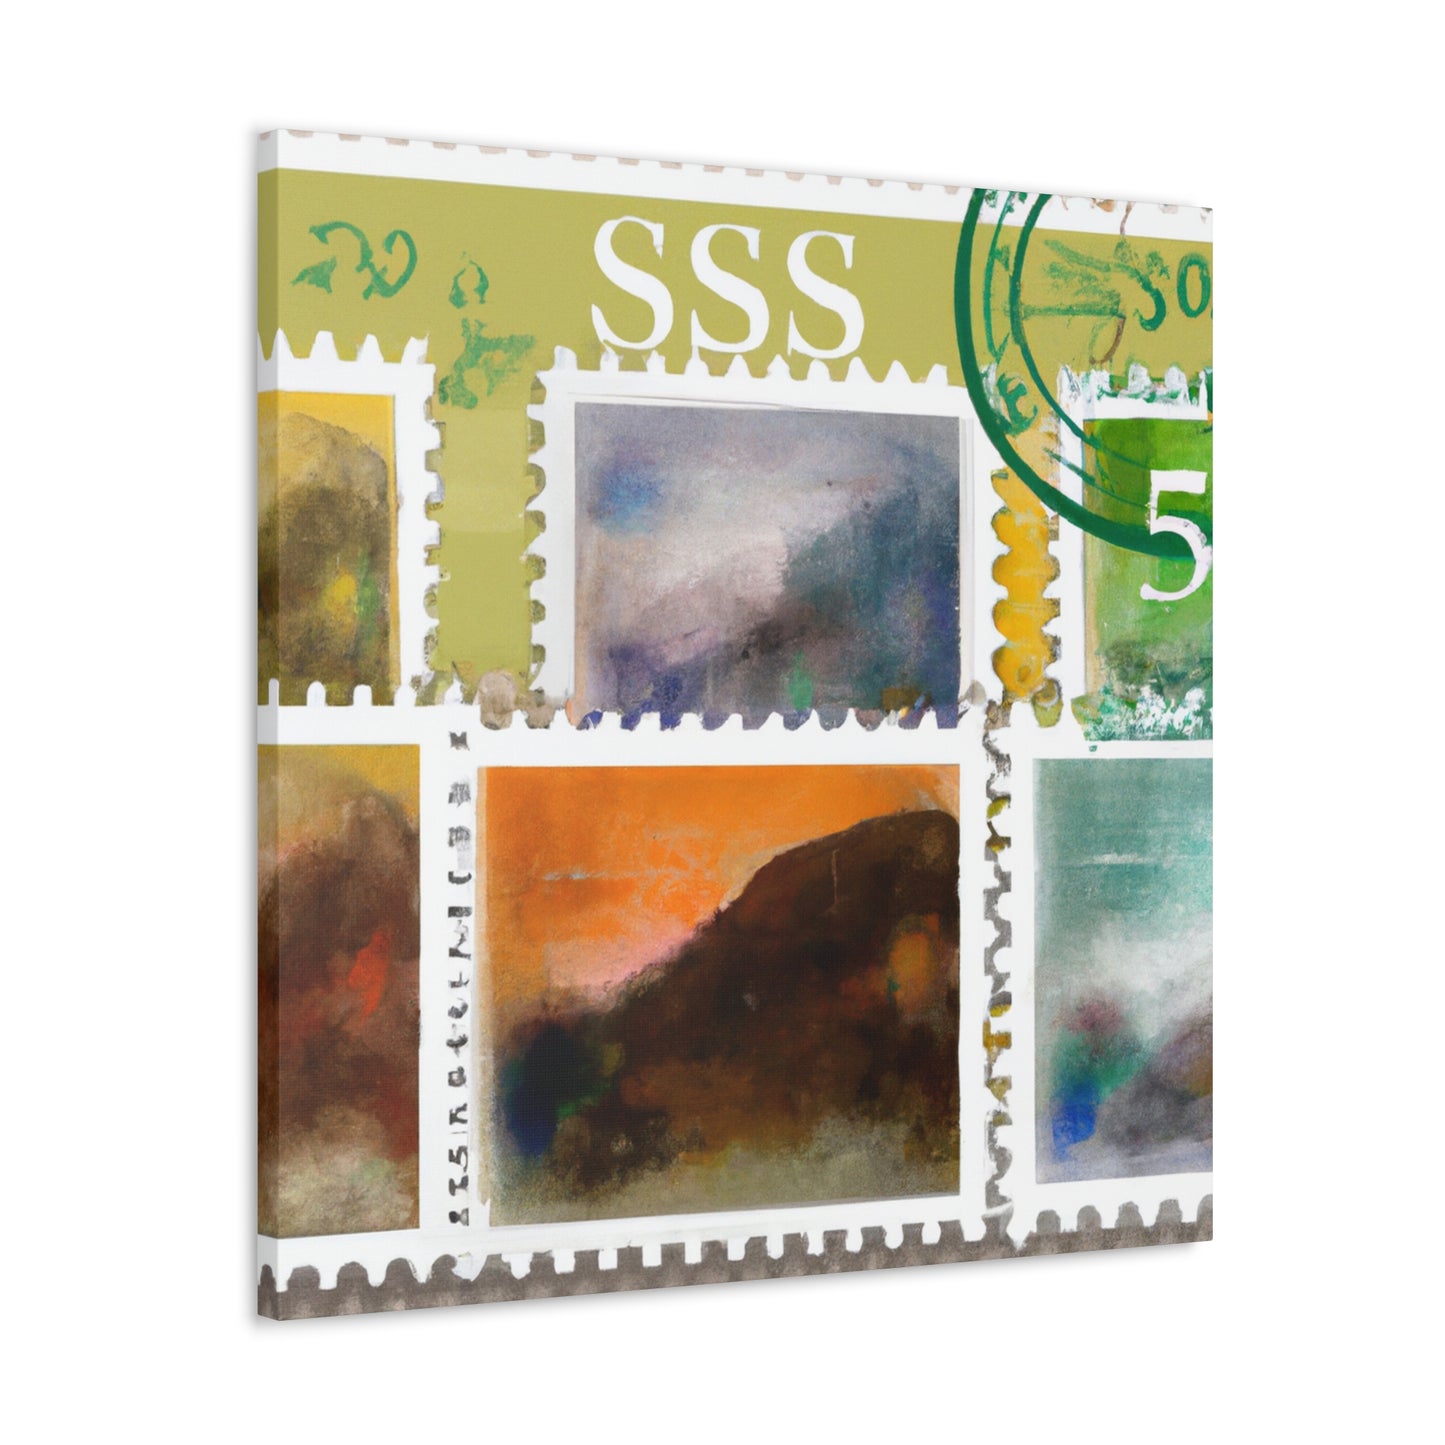 "A World of Wanderlust" - Postage Stamp Collector Canvas Wall Art